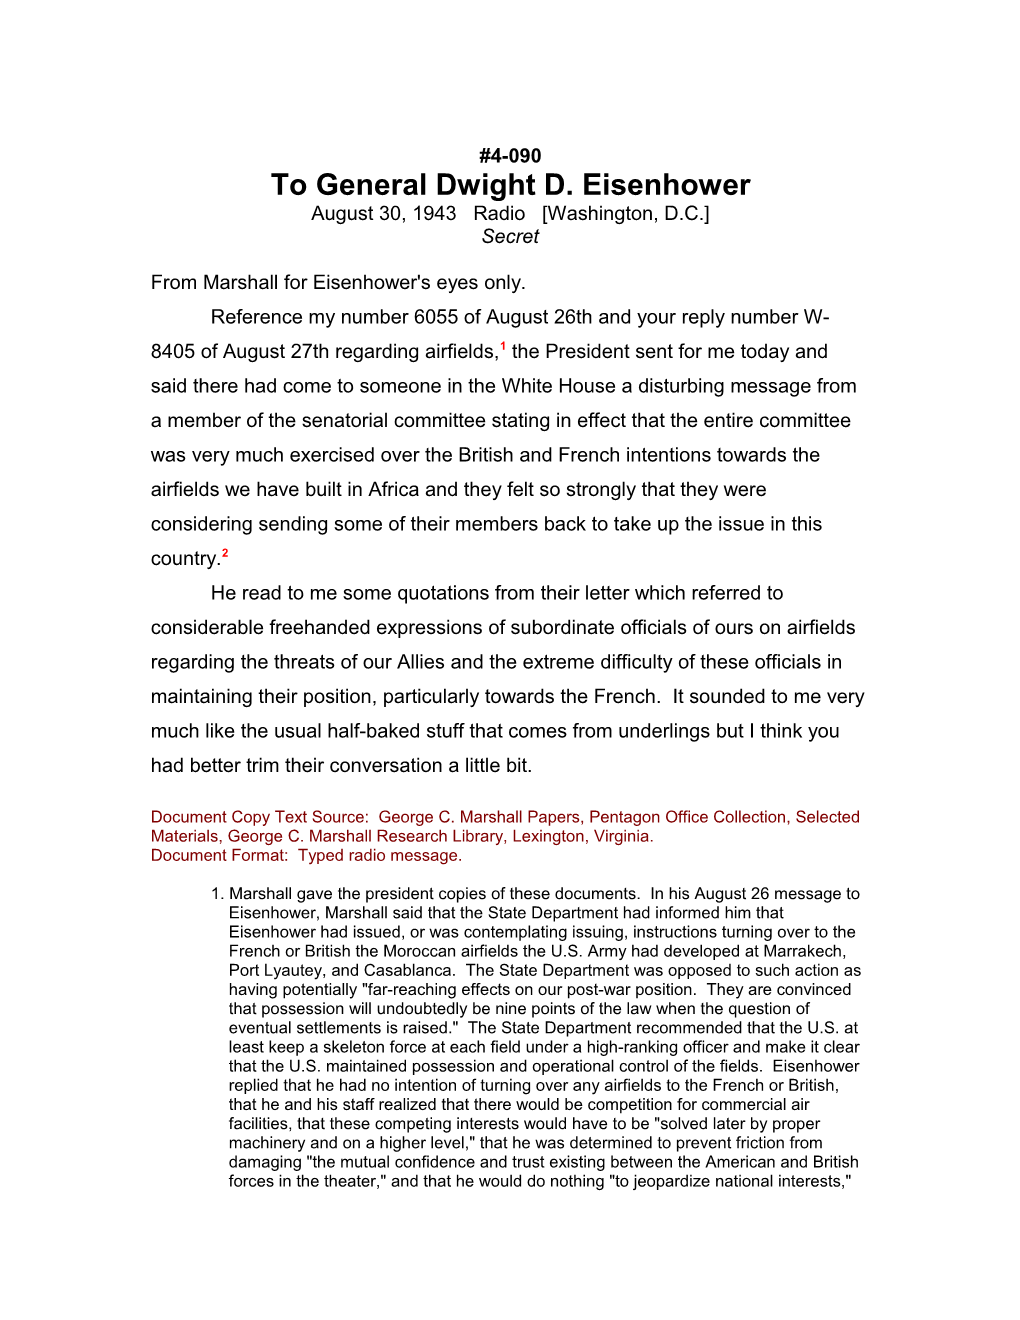 To General Dwight D. Eisenhower s3